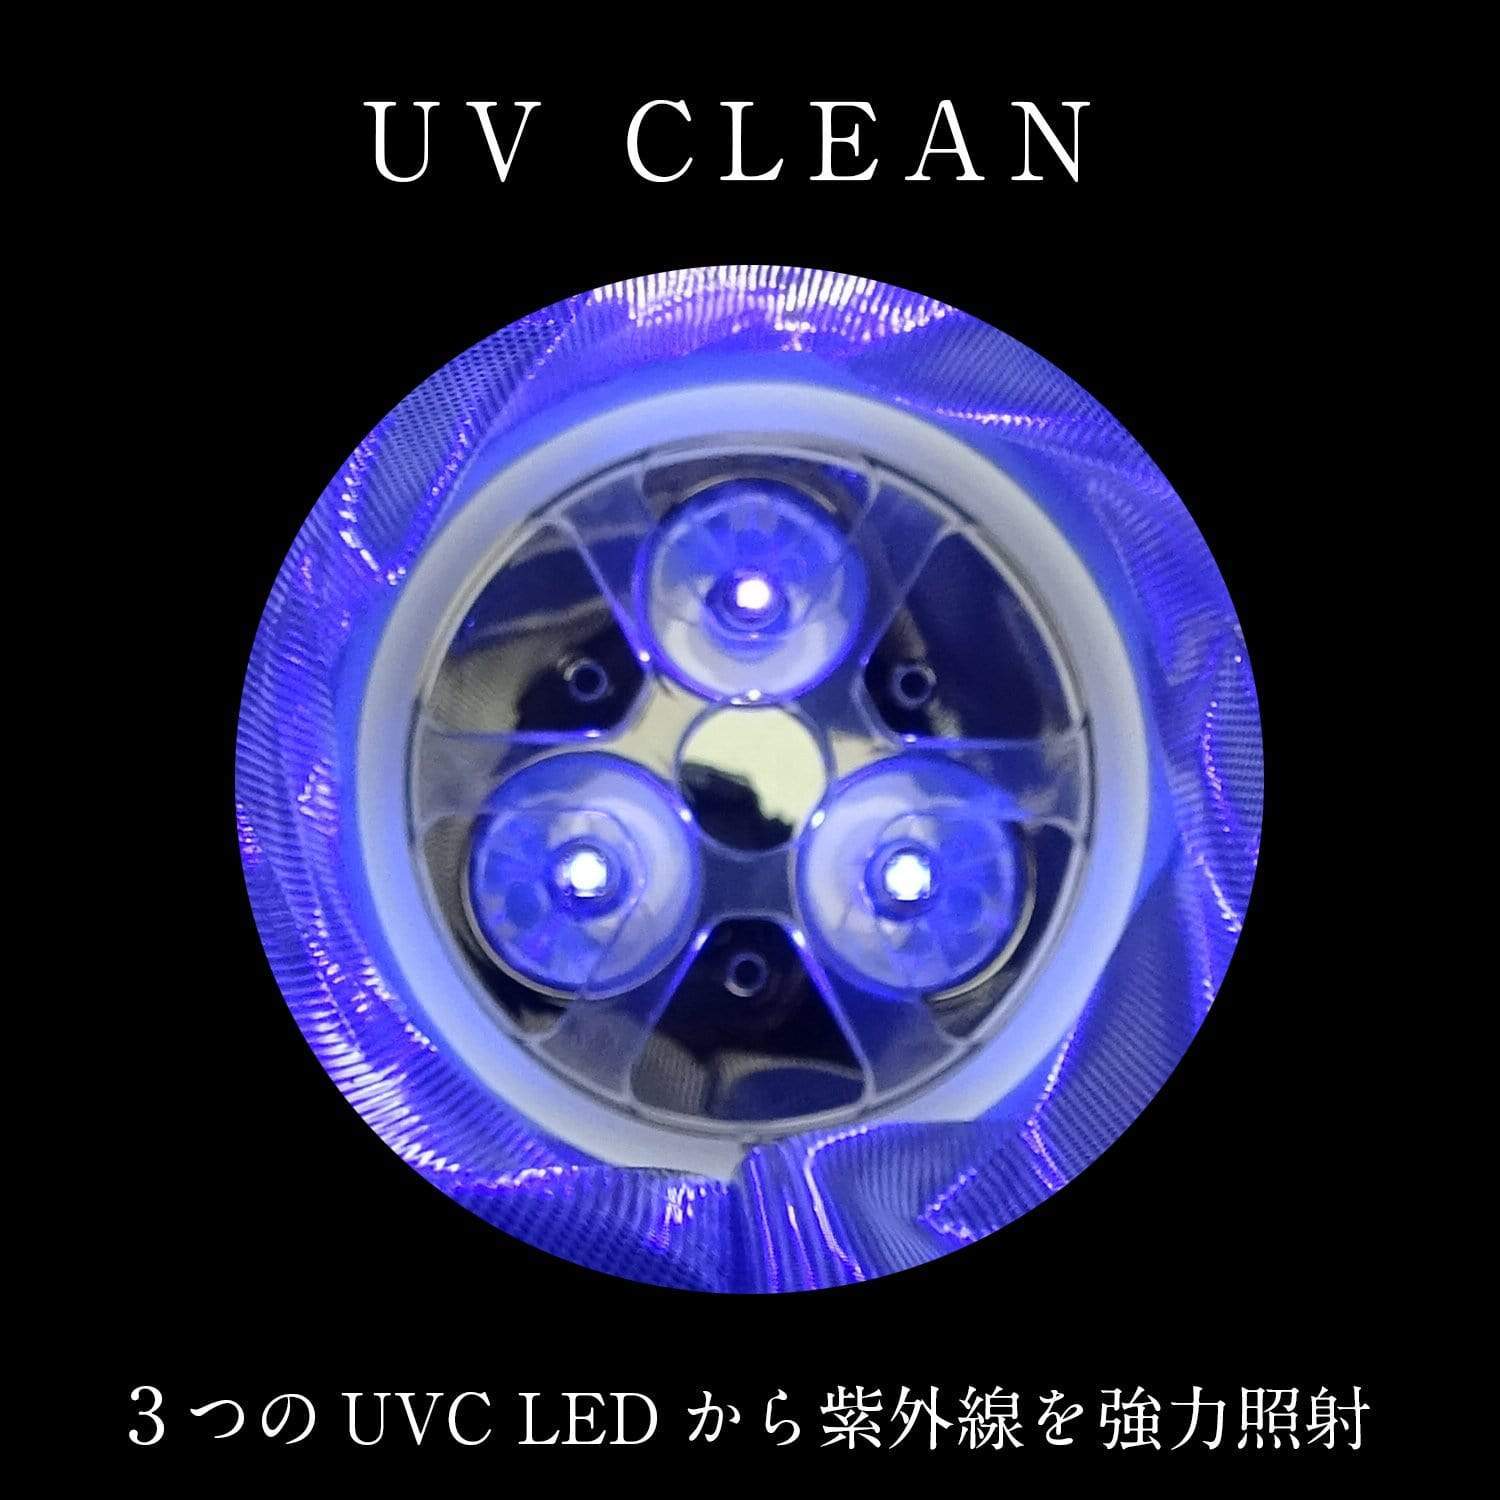 SSI Japan - Rechargable UV Clean Bag Toy Cleaners 4571361303124 CherryAffairs